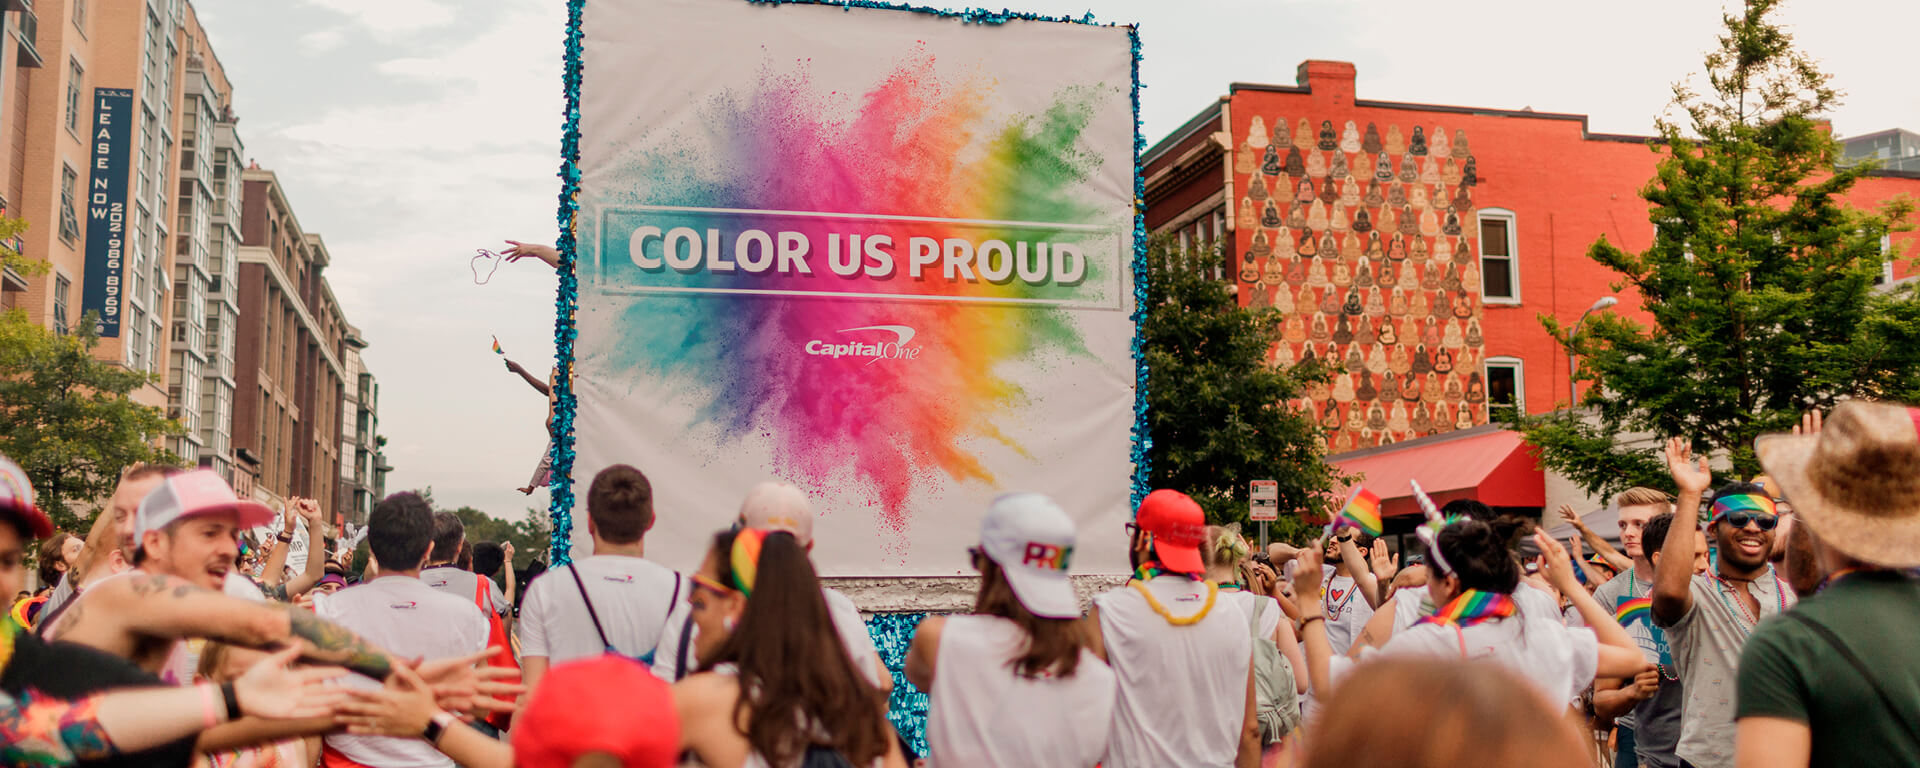 Capital One associates stand outside in a crowd celebrating Pride month with a large colorful banner that says 